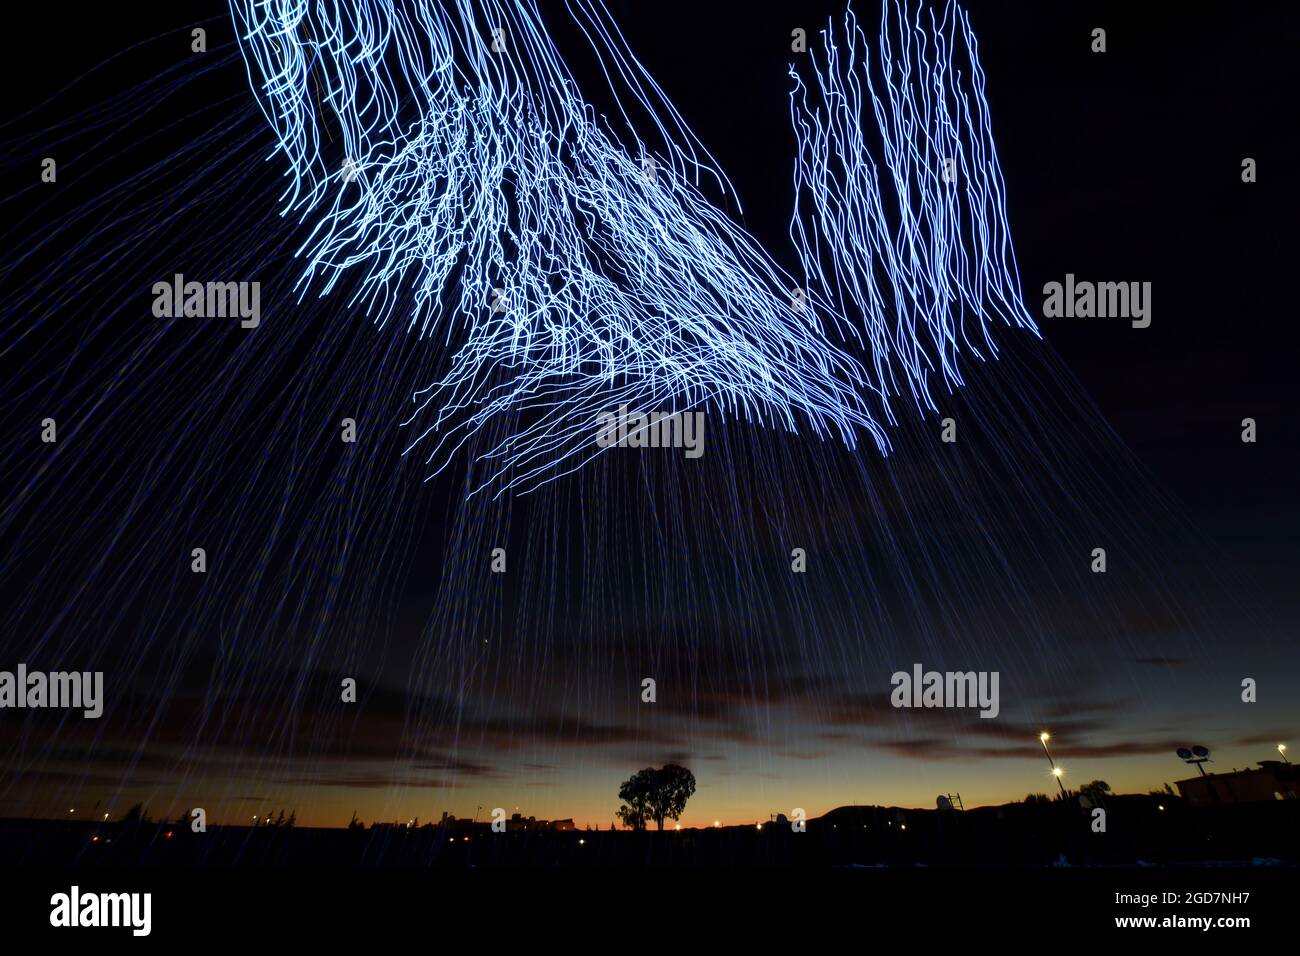 A view of Travis Air Force Base, Calif.'s Intel Shooting Star Drone light show where Travis families were shown the choreographed capabilities of over 500 drones during an Independence Day celebration July 5, 2018. The drones conducted a show consisting of various designs meant to highlight both the U.S. Air Force's and Travis' history. (U.S. Air Force photo by Airman 1st Class Christian Conrad) Stock Photo